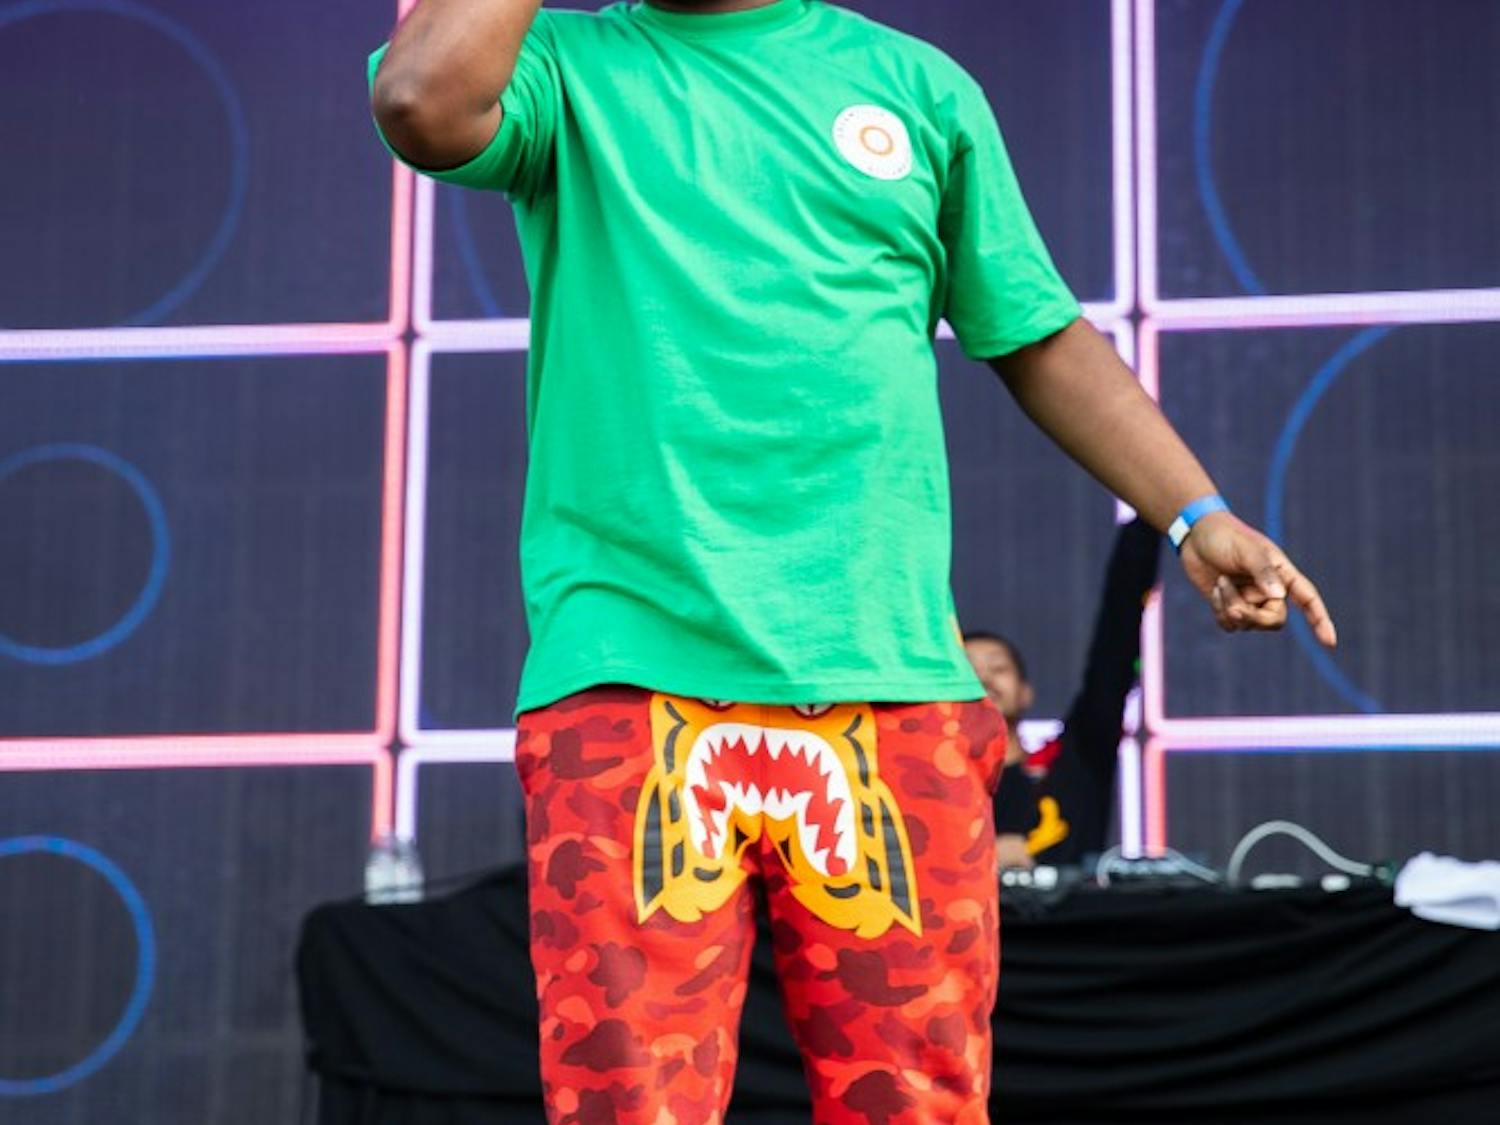 Bas performs his set at the inaugural Dreamville Fest at Dorothea Dix Park on Saturday, April 6, 2019 in Raleigh, N.C. In its inaugural event, 40,000 people attended Dreamville after it was postponed in the fall of 2018 because of Hurricane Florence.